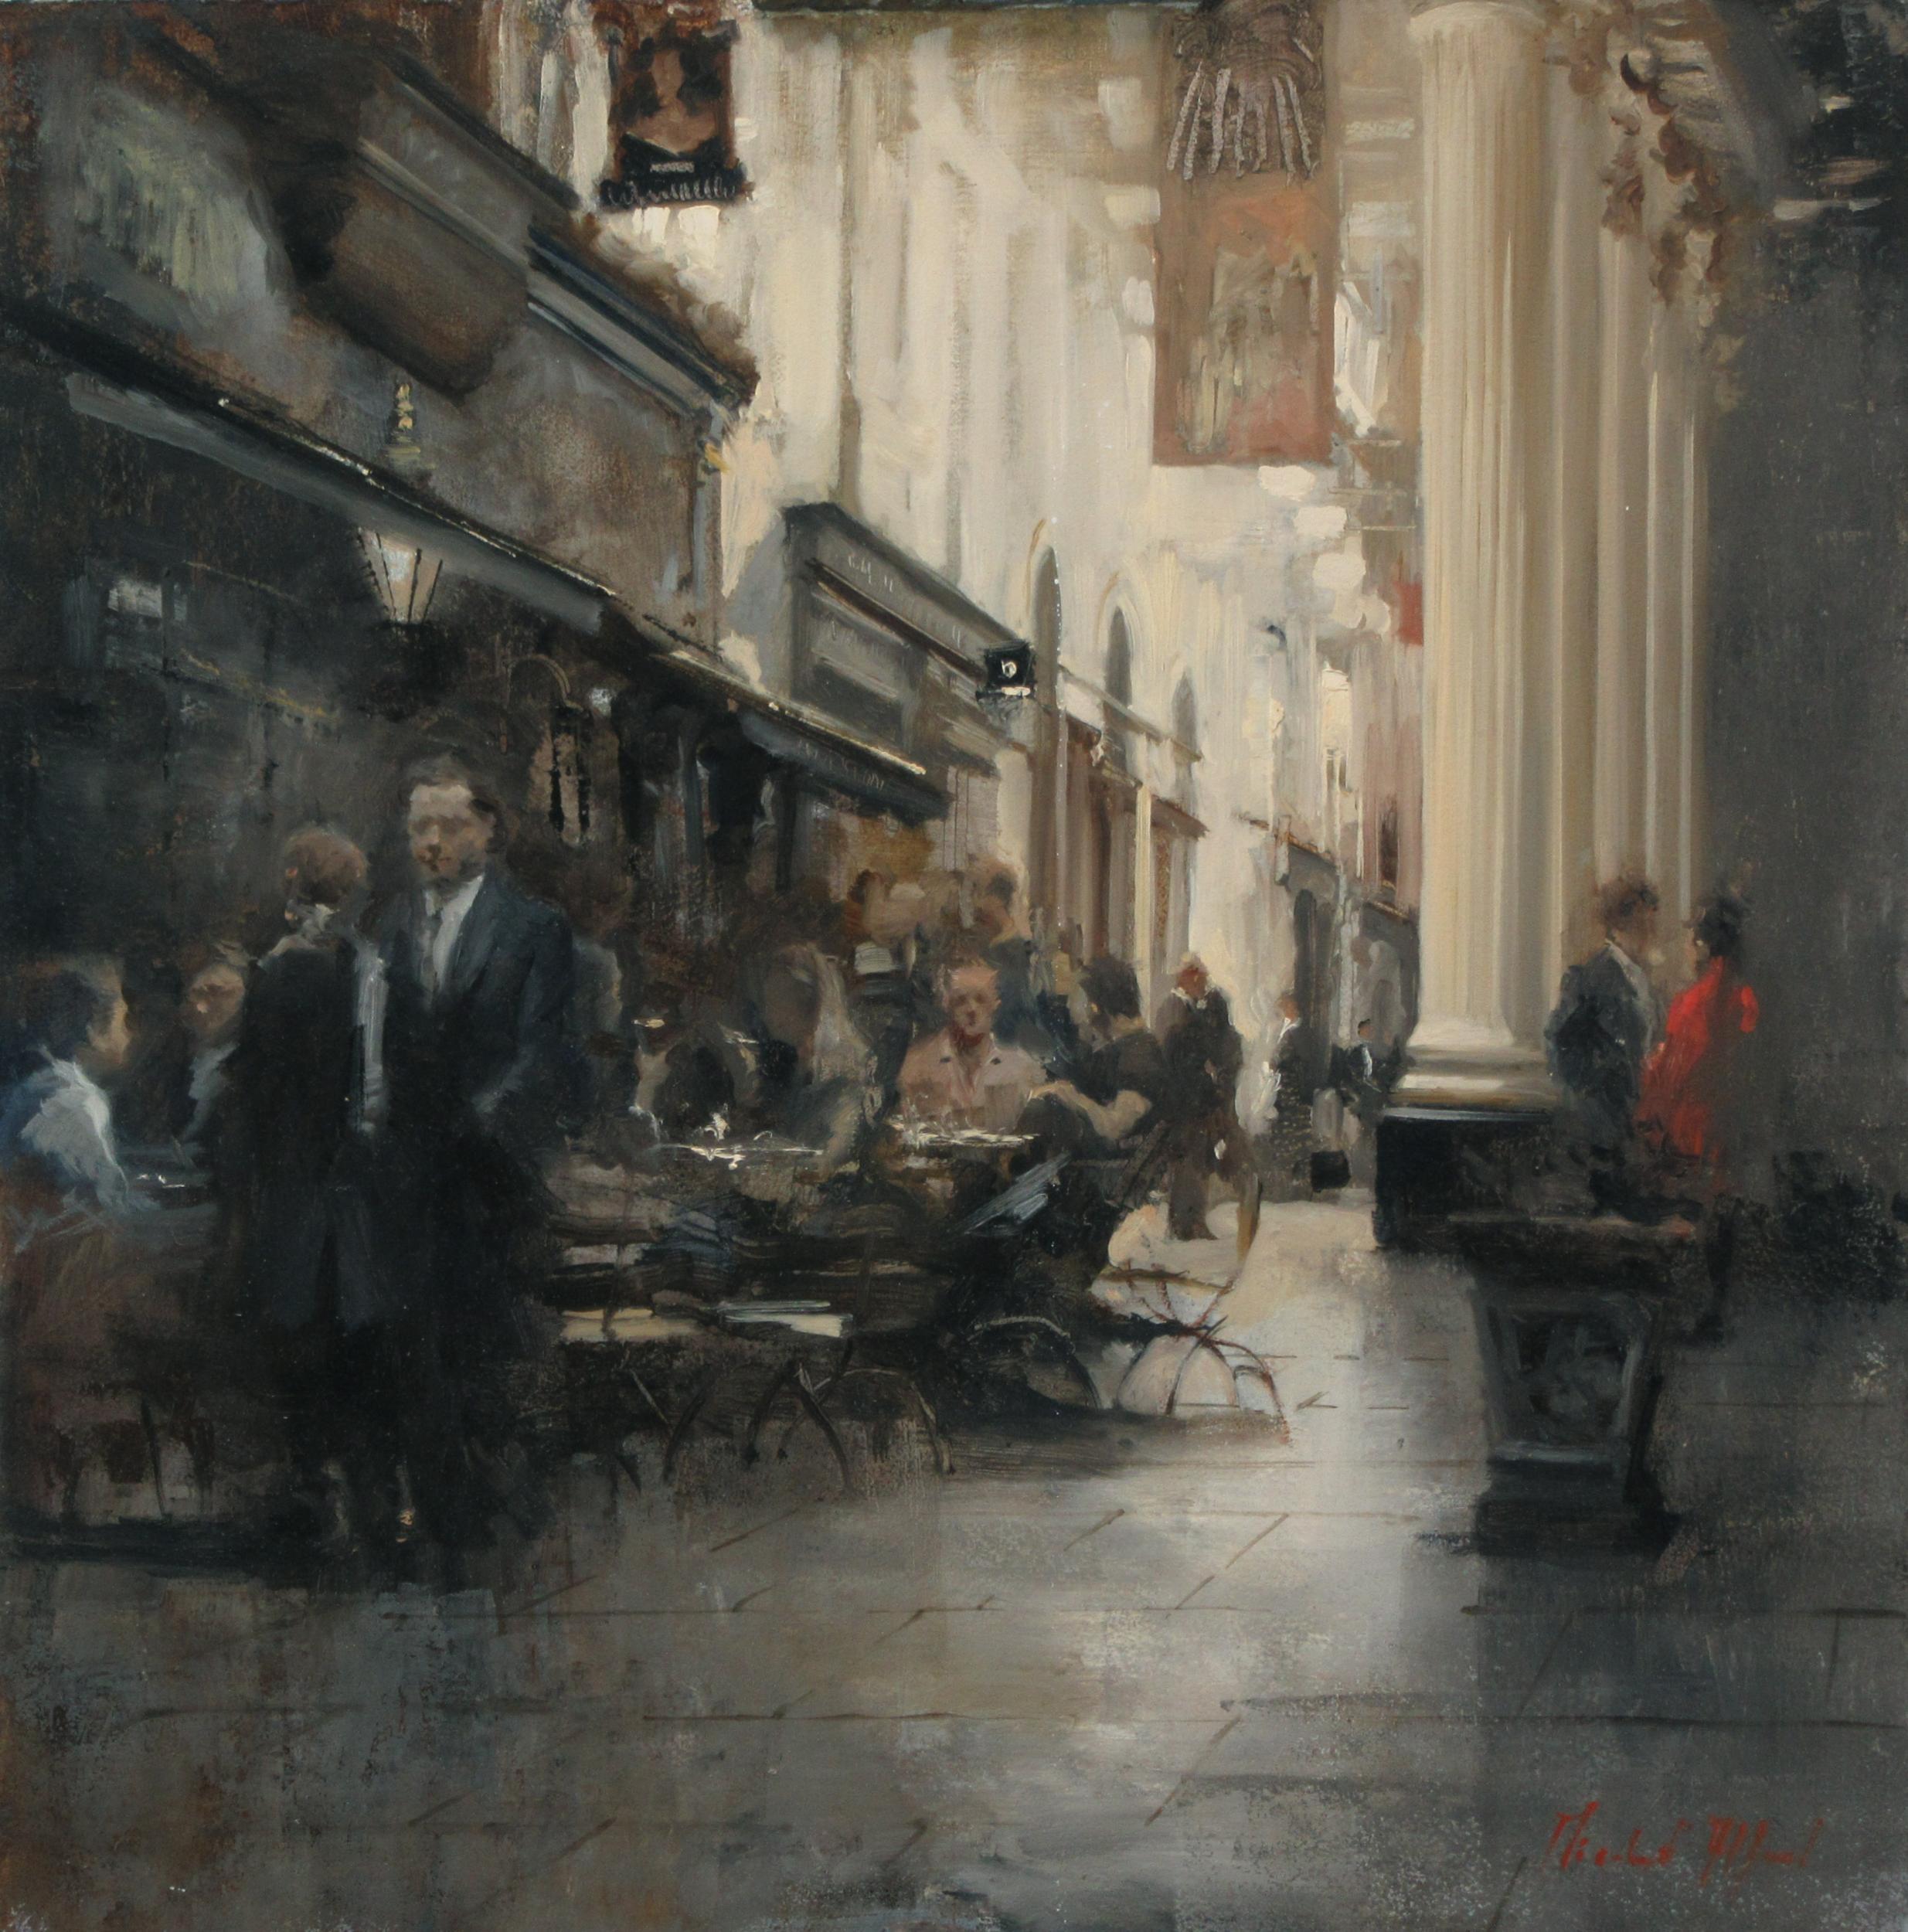 Theatre Nights - Painting by Michael Alford